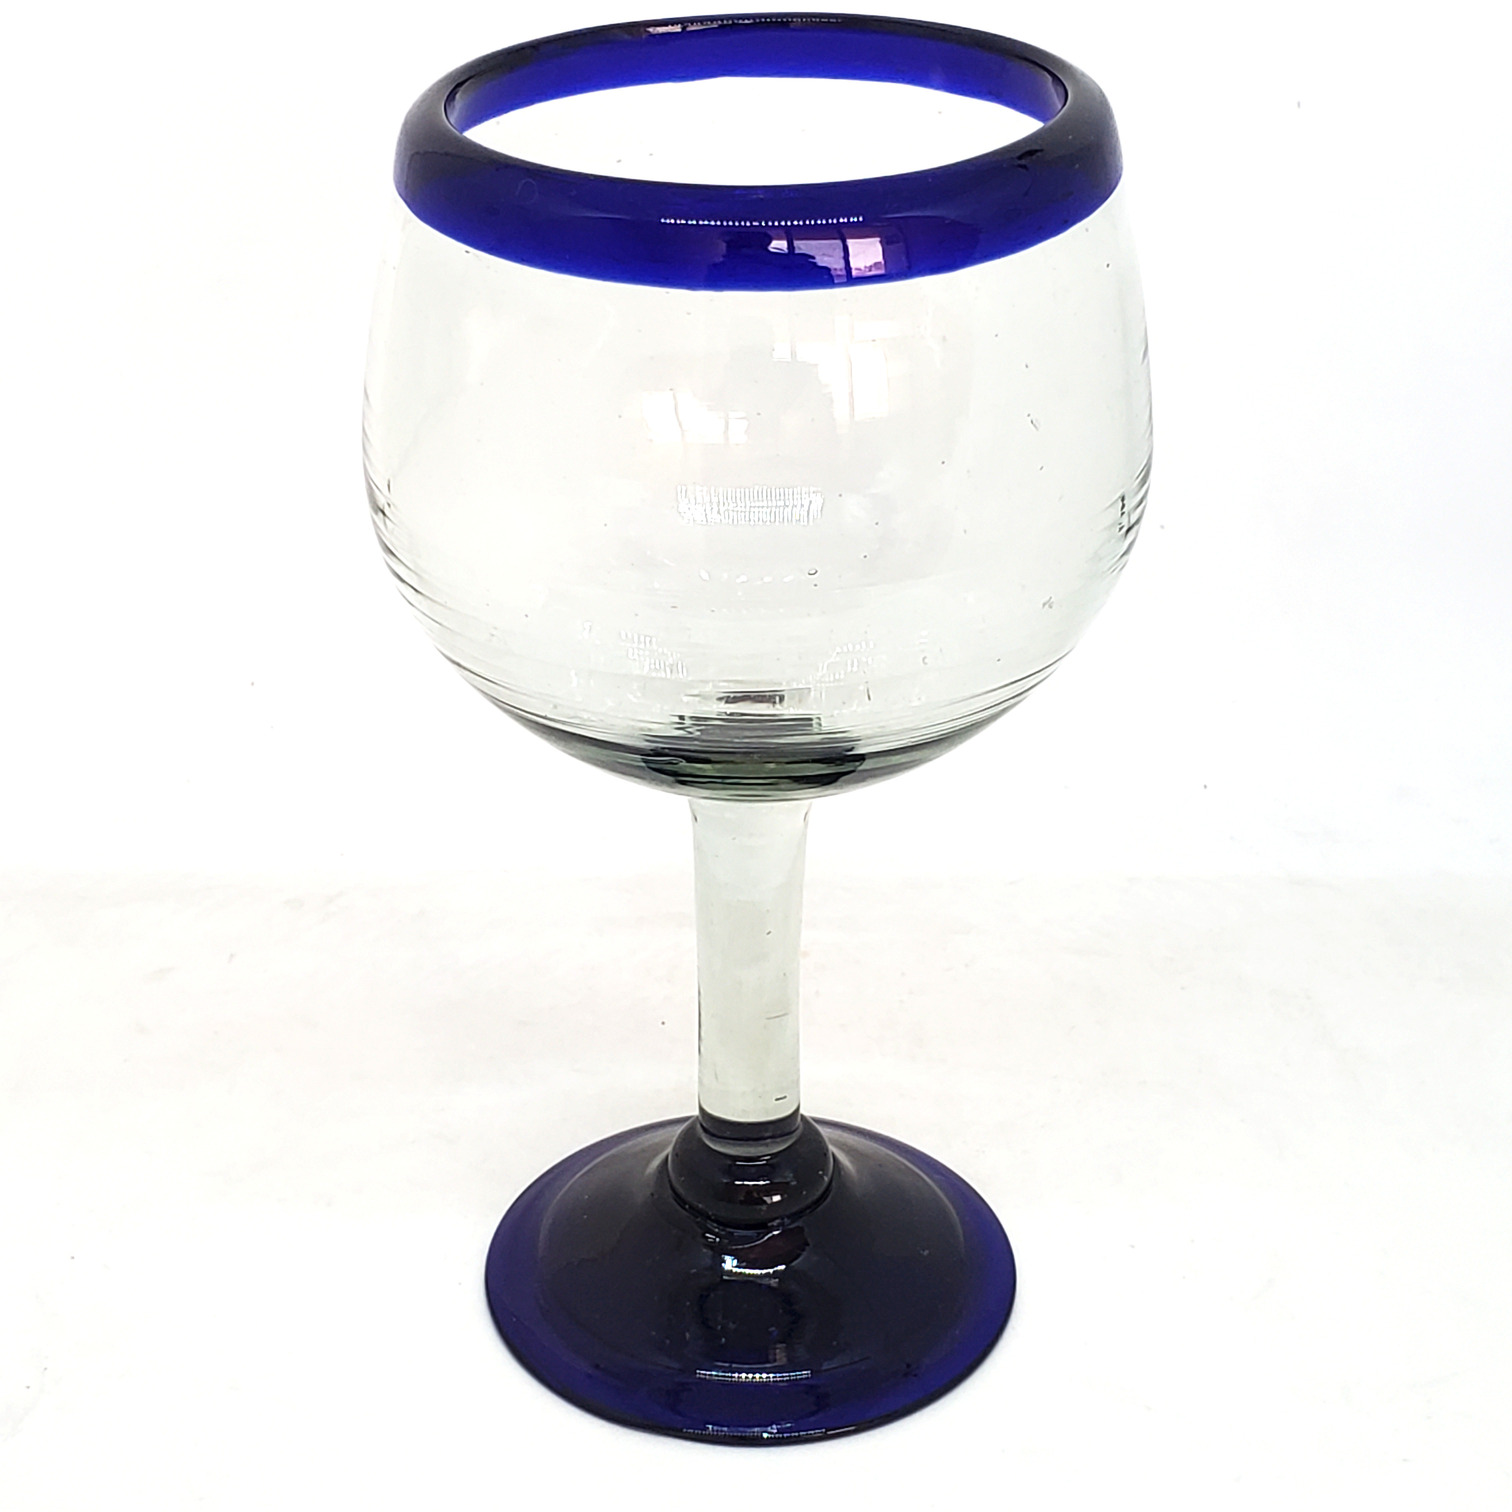 Wholesale Cobalt Blue Rim Glassware / Cobalt Blue Rim 15 oz Balloon Wine Glasses  / These balloon wine glasses are the largest of their class, you will enjoy them as they capture the bouquet of a fine red wine.